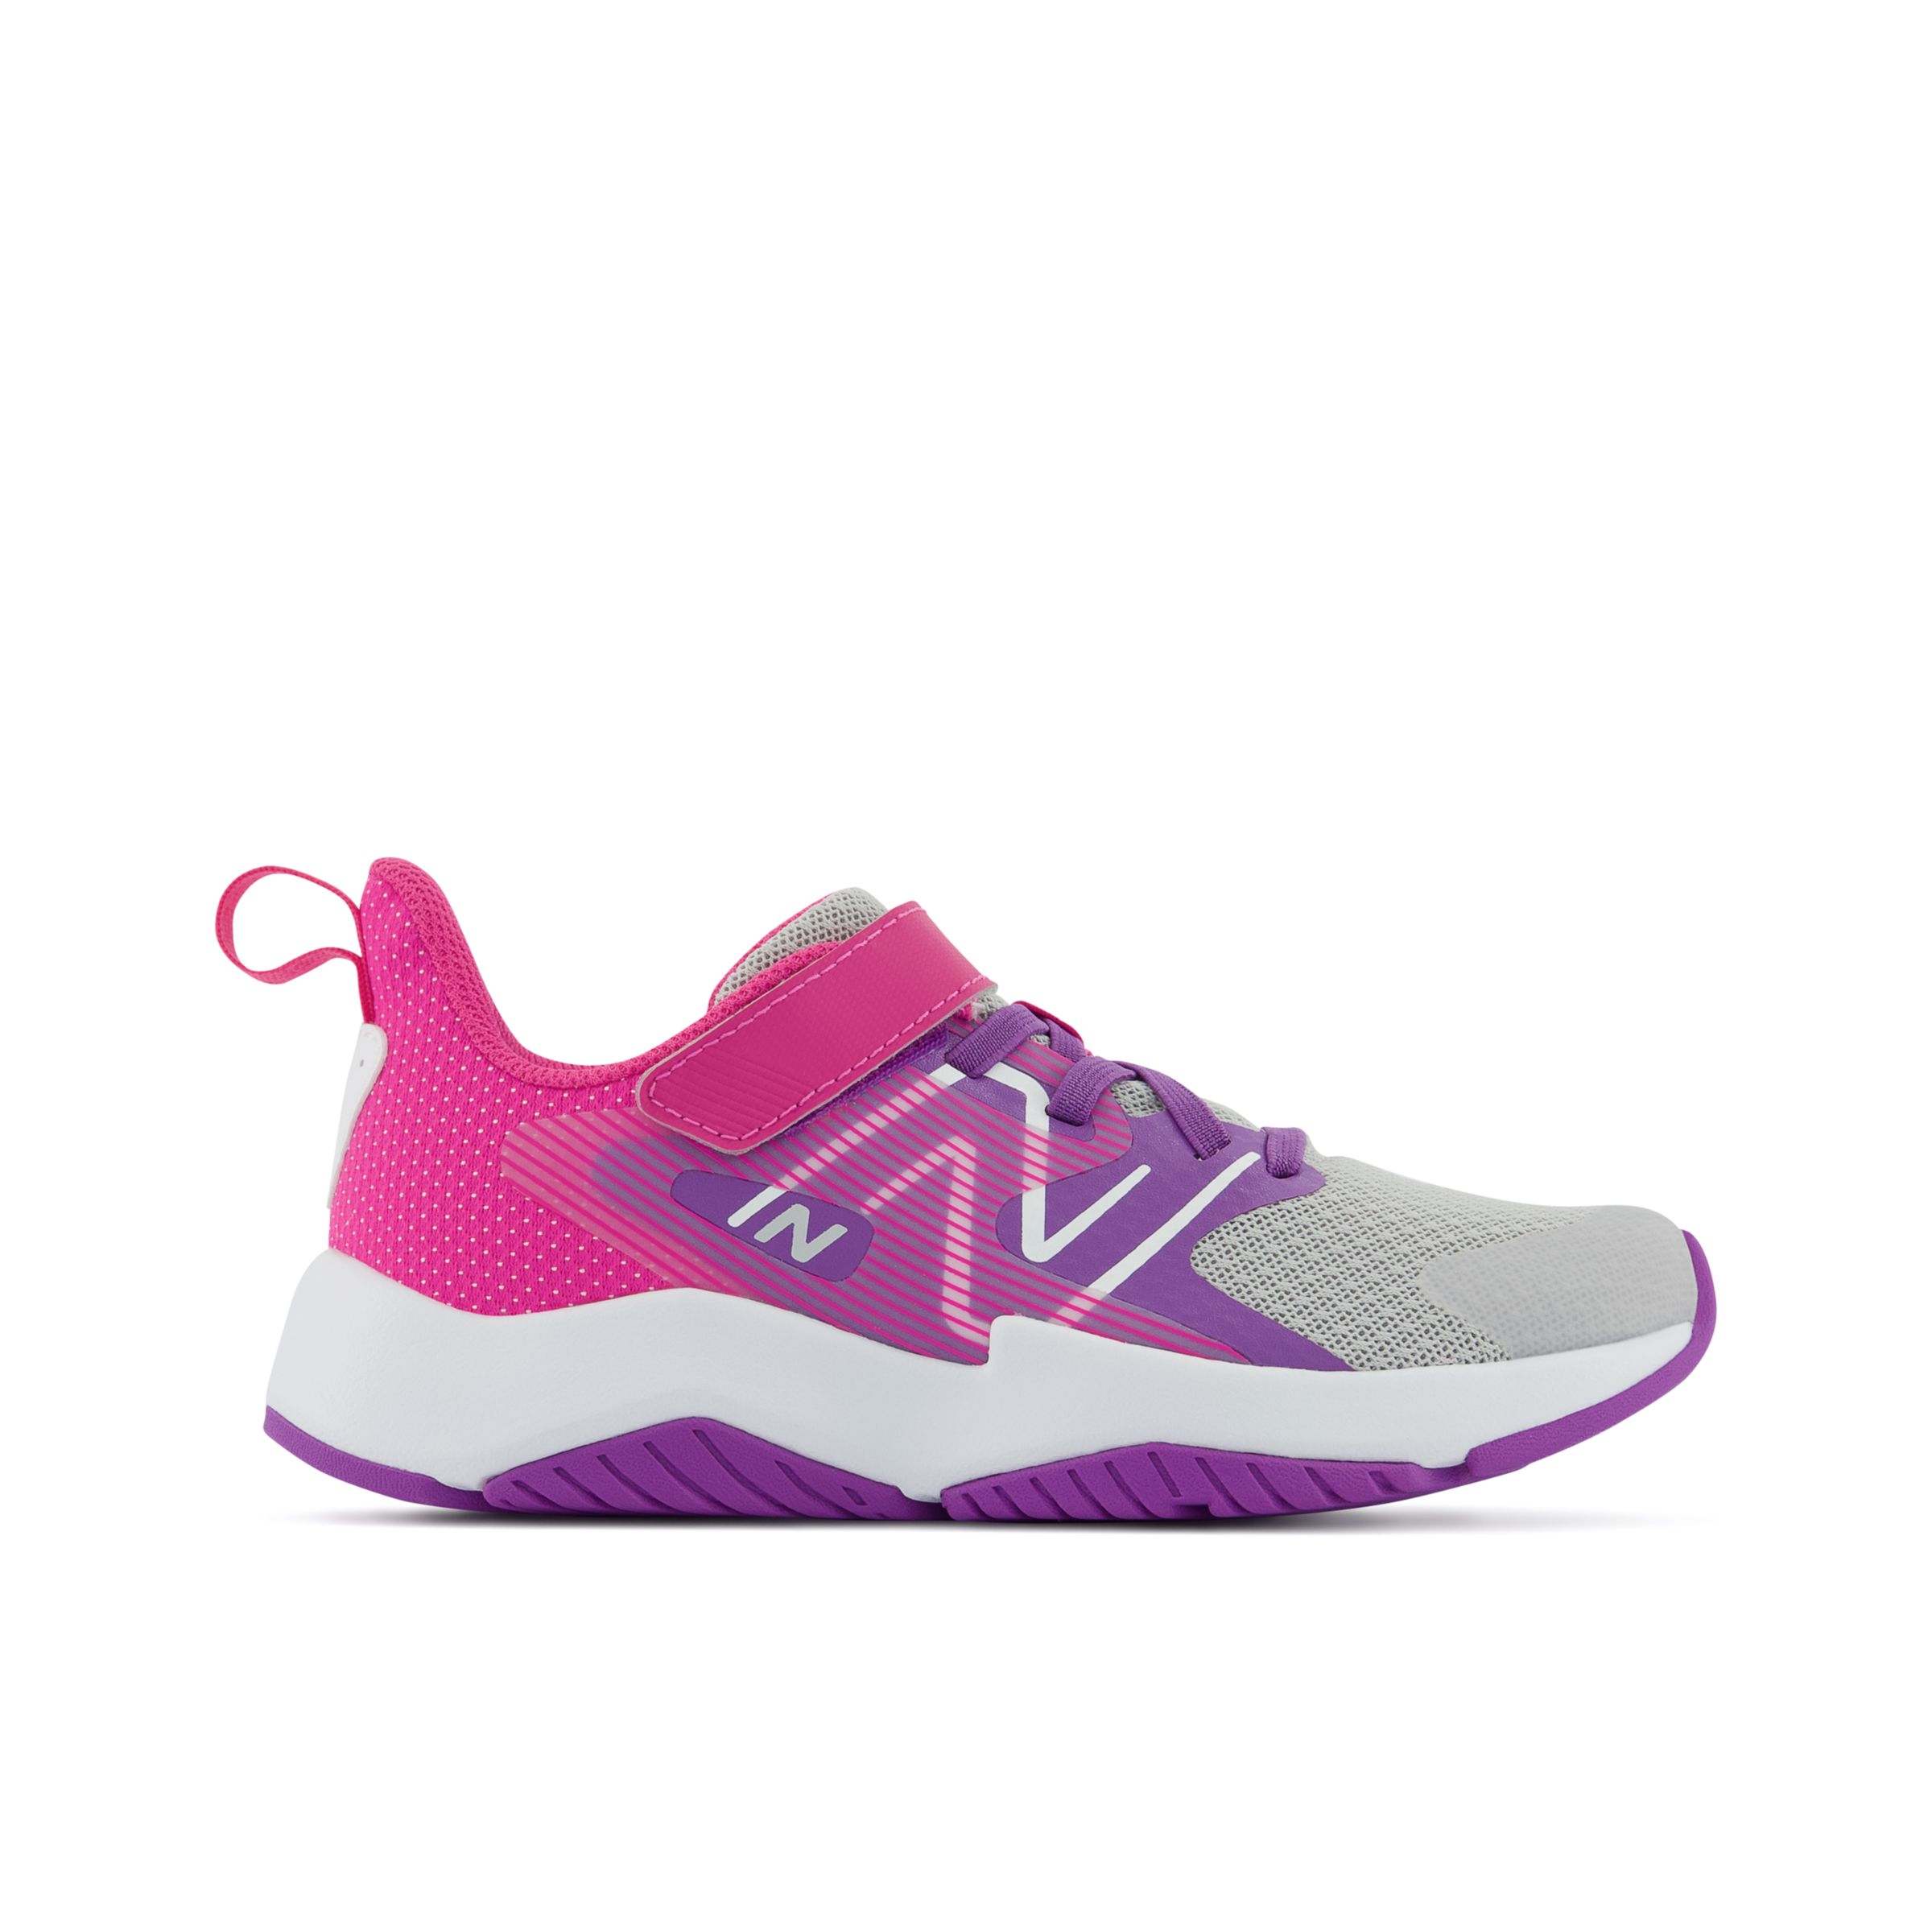 

New Balance Kids' Rave Run v2 Bungee Lace with Top Strap Grey/Purple/Pink - Grey/Purple/Pink